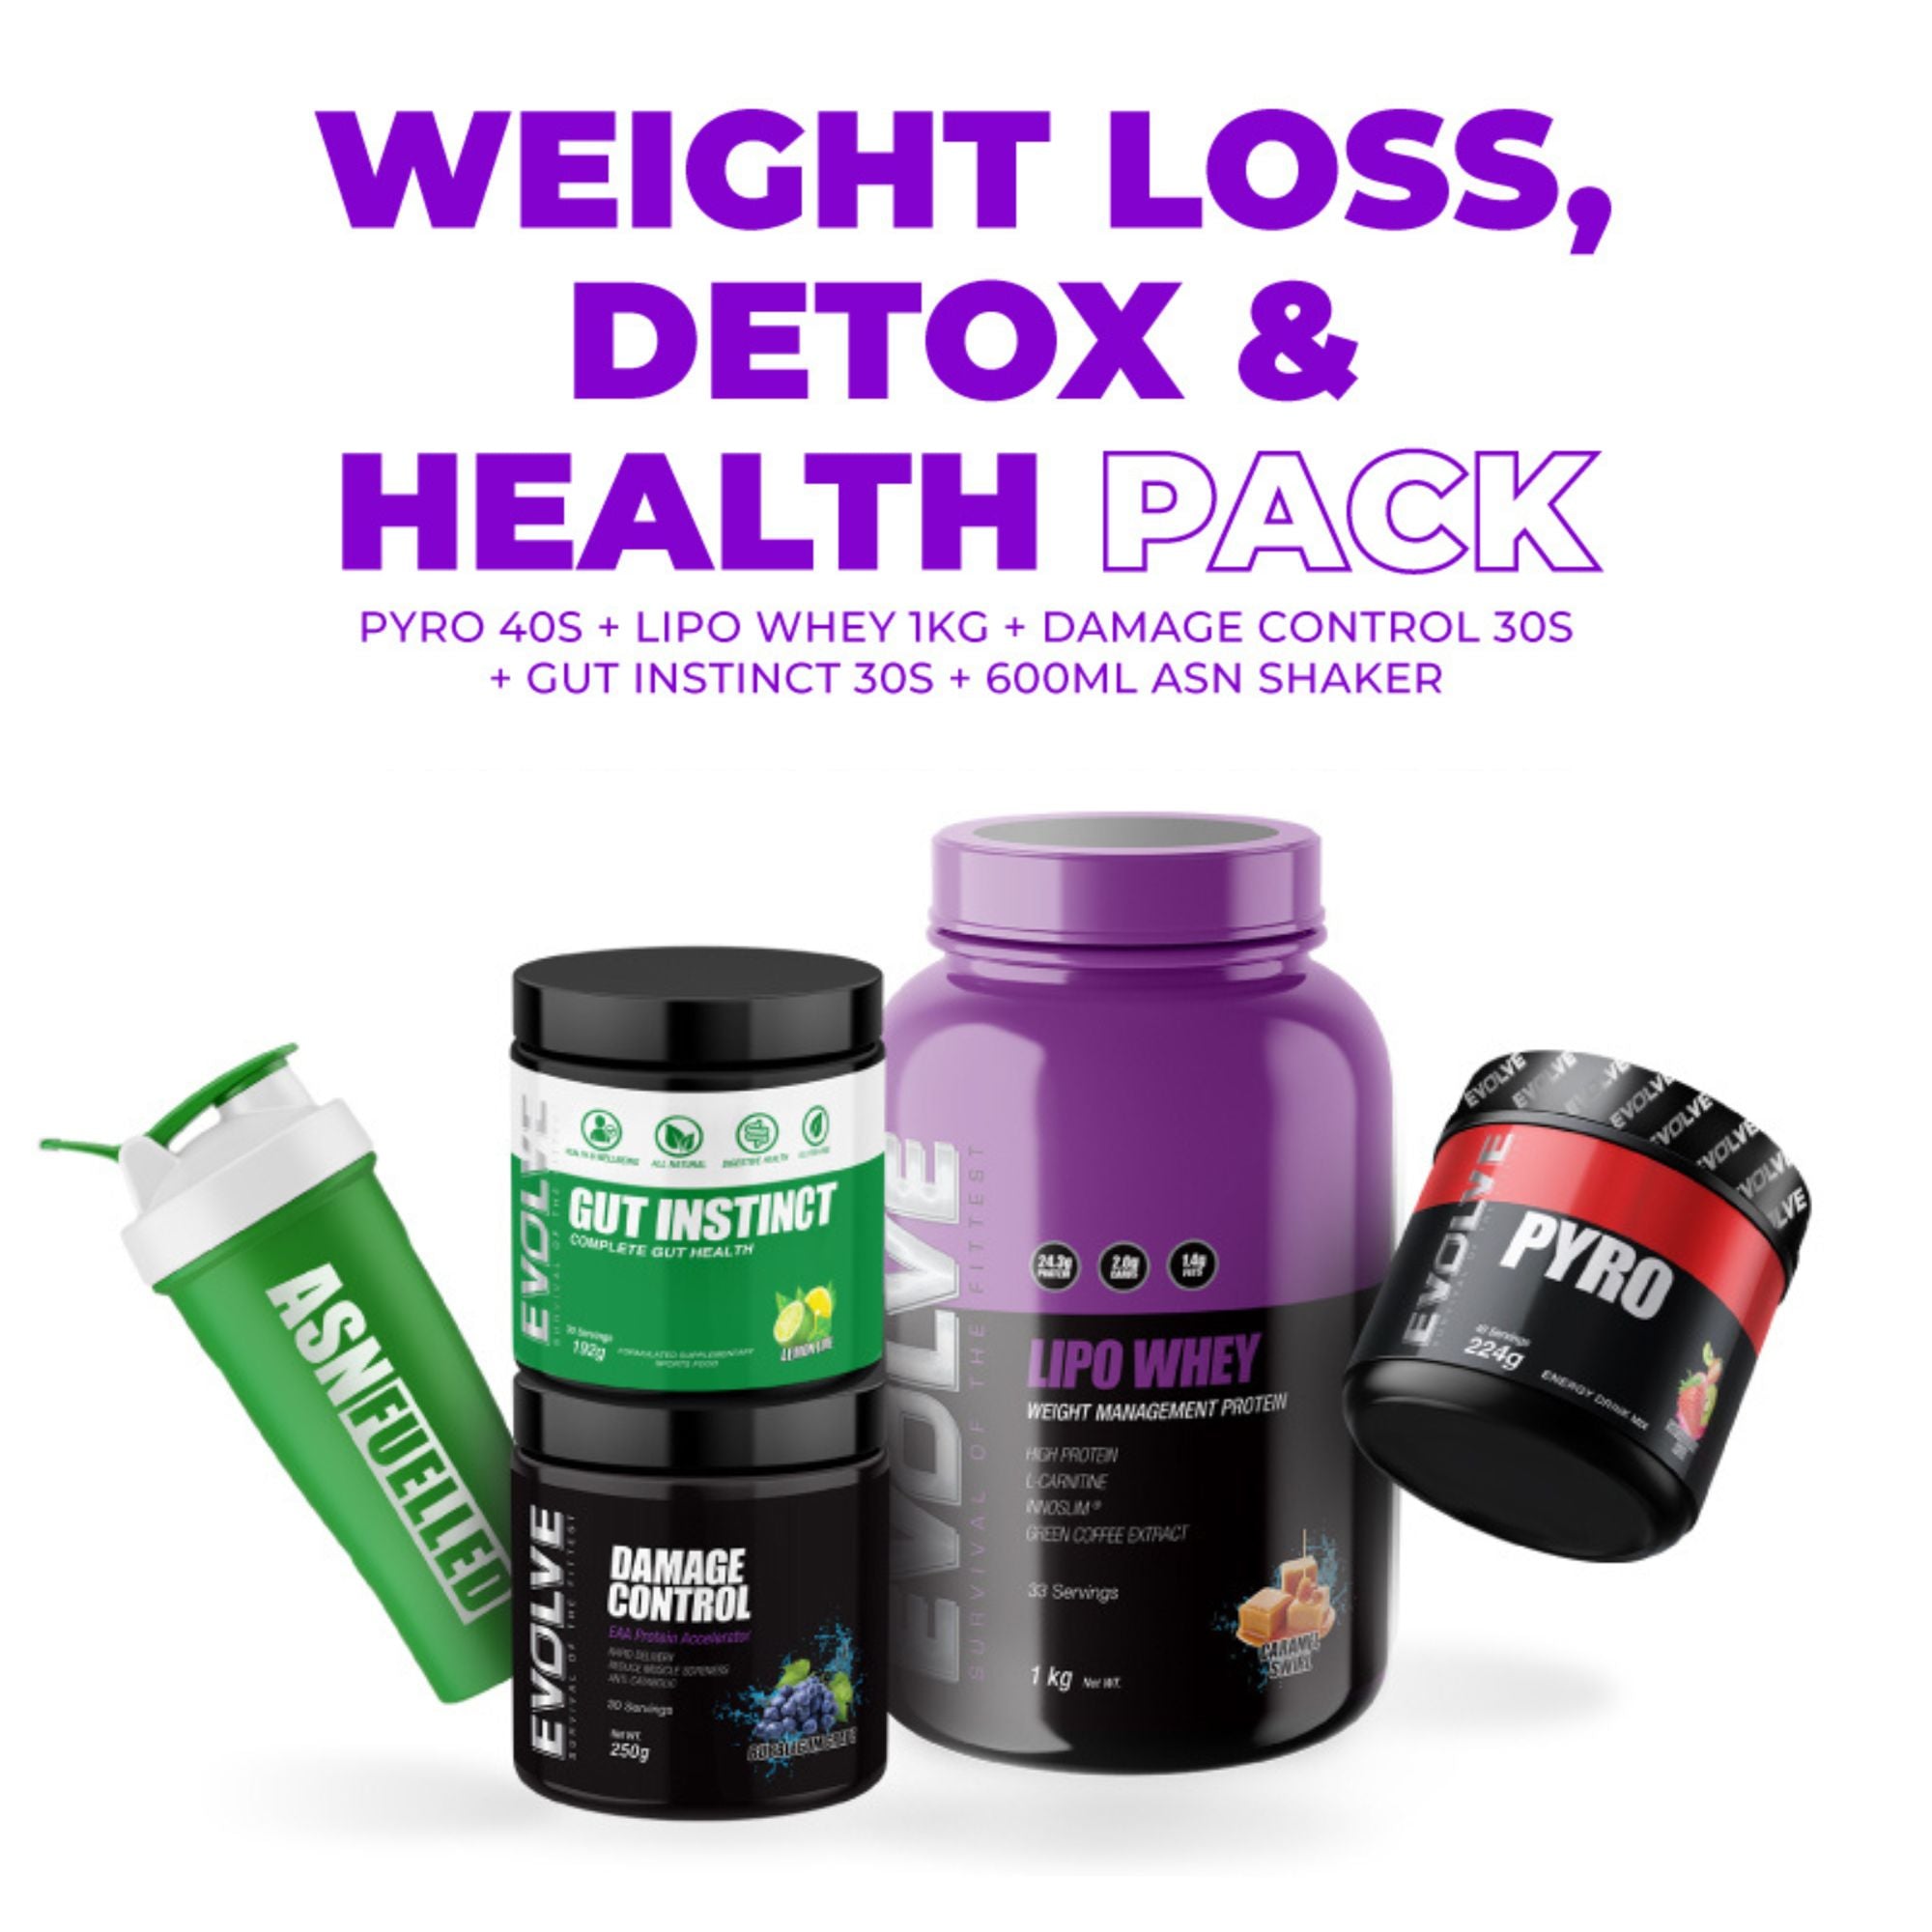 Jake Campus Weight Loss, Detox and Health Pack